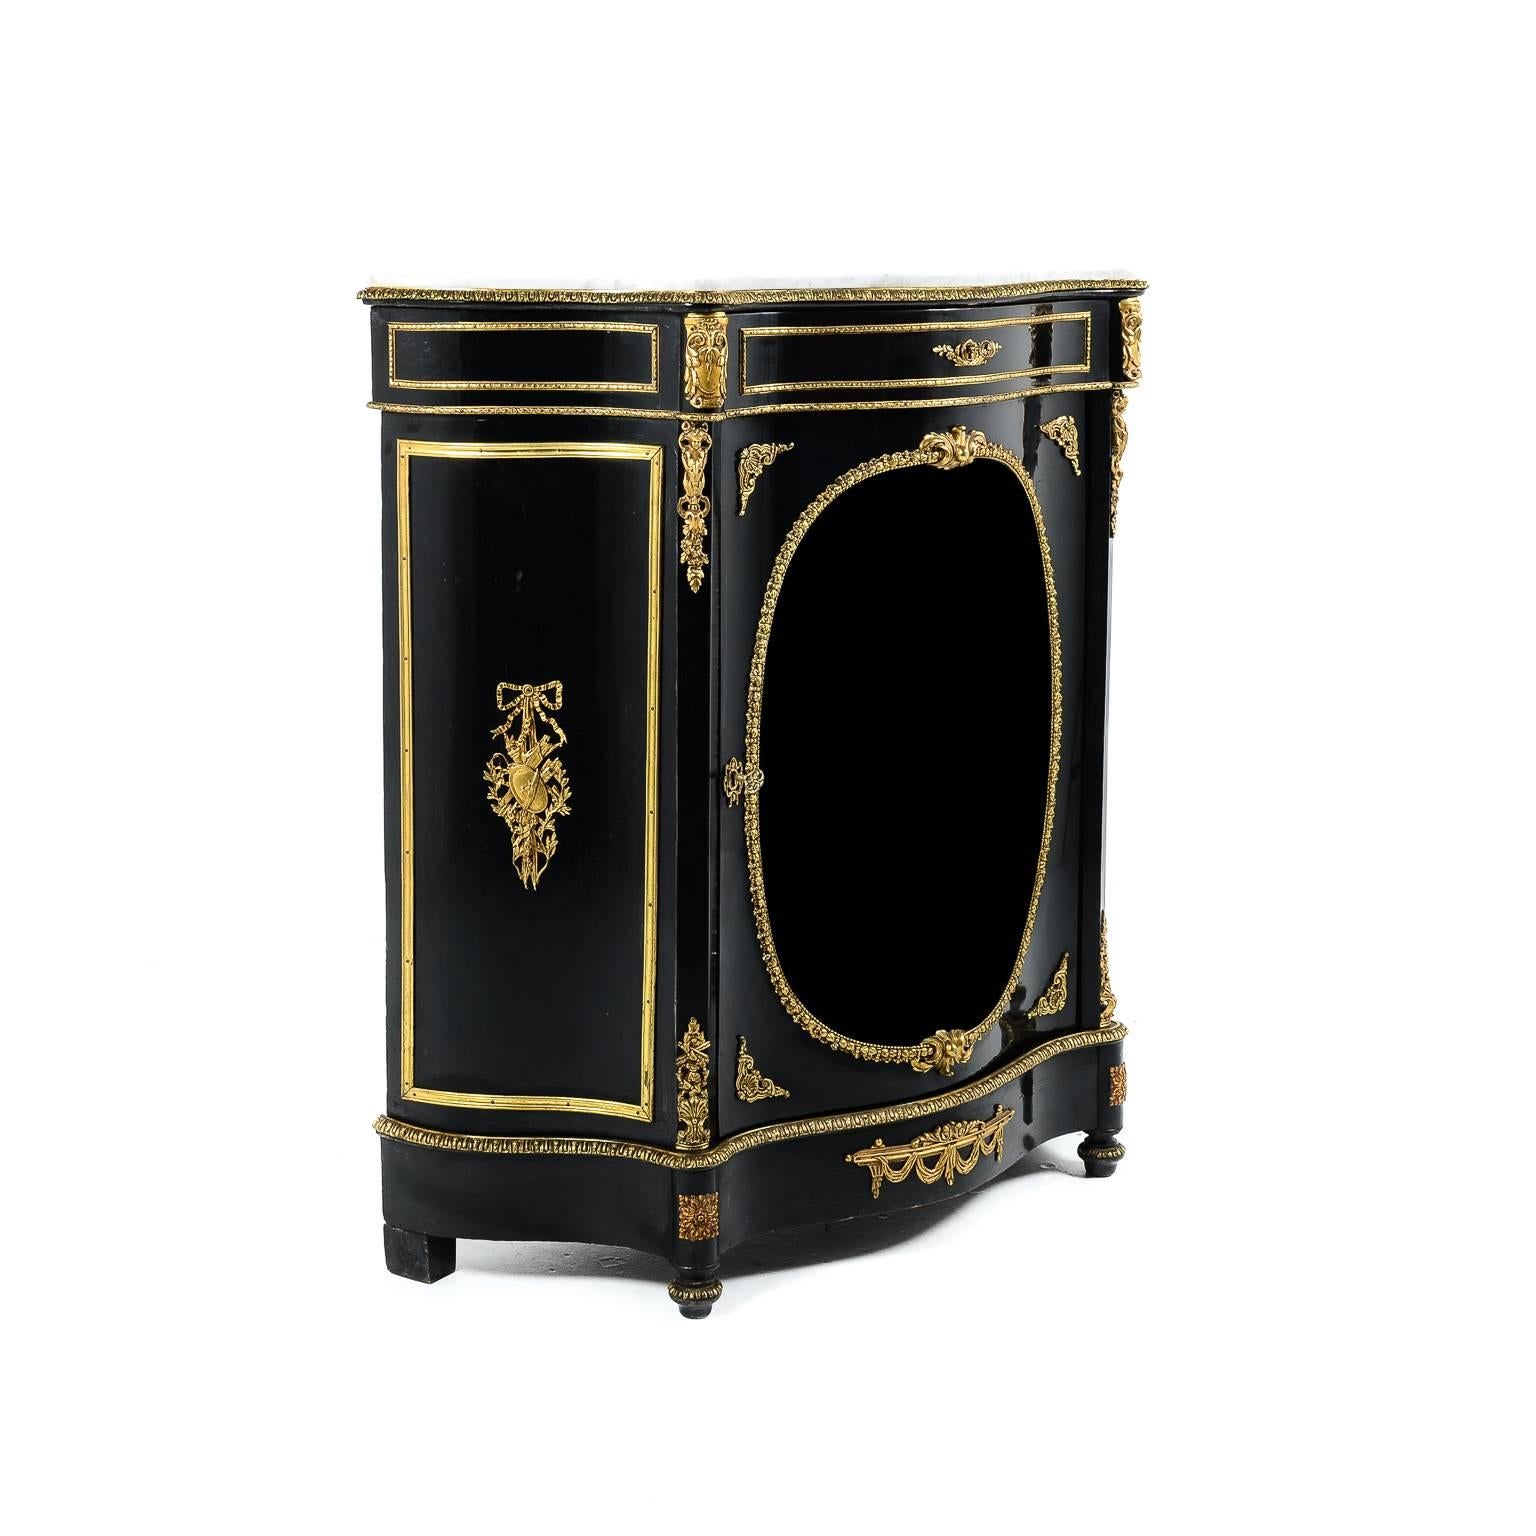 Antique 19th century ebonized Napoleon III marble-top cabinet with fine bronze mounts and the original curved glass, in exceptional original condition, circa 1870. Its dimensions make it a likely candidate for many different rooms in the